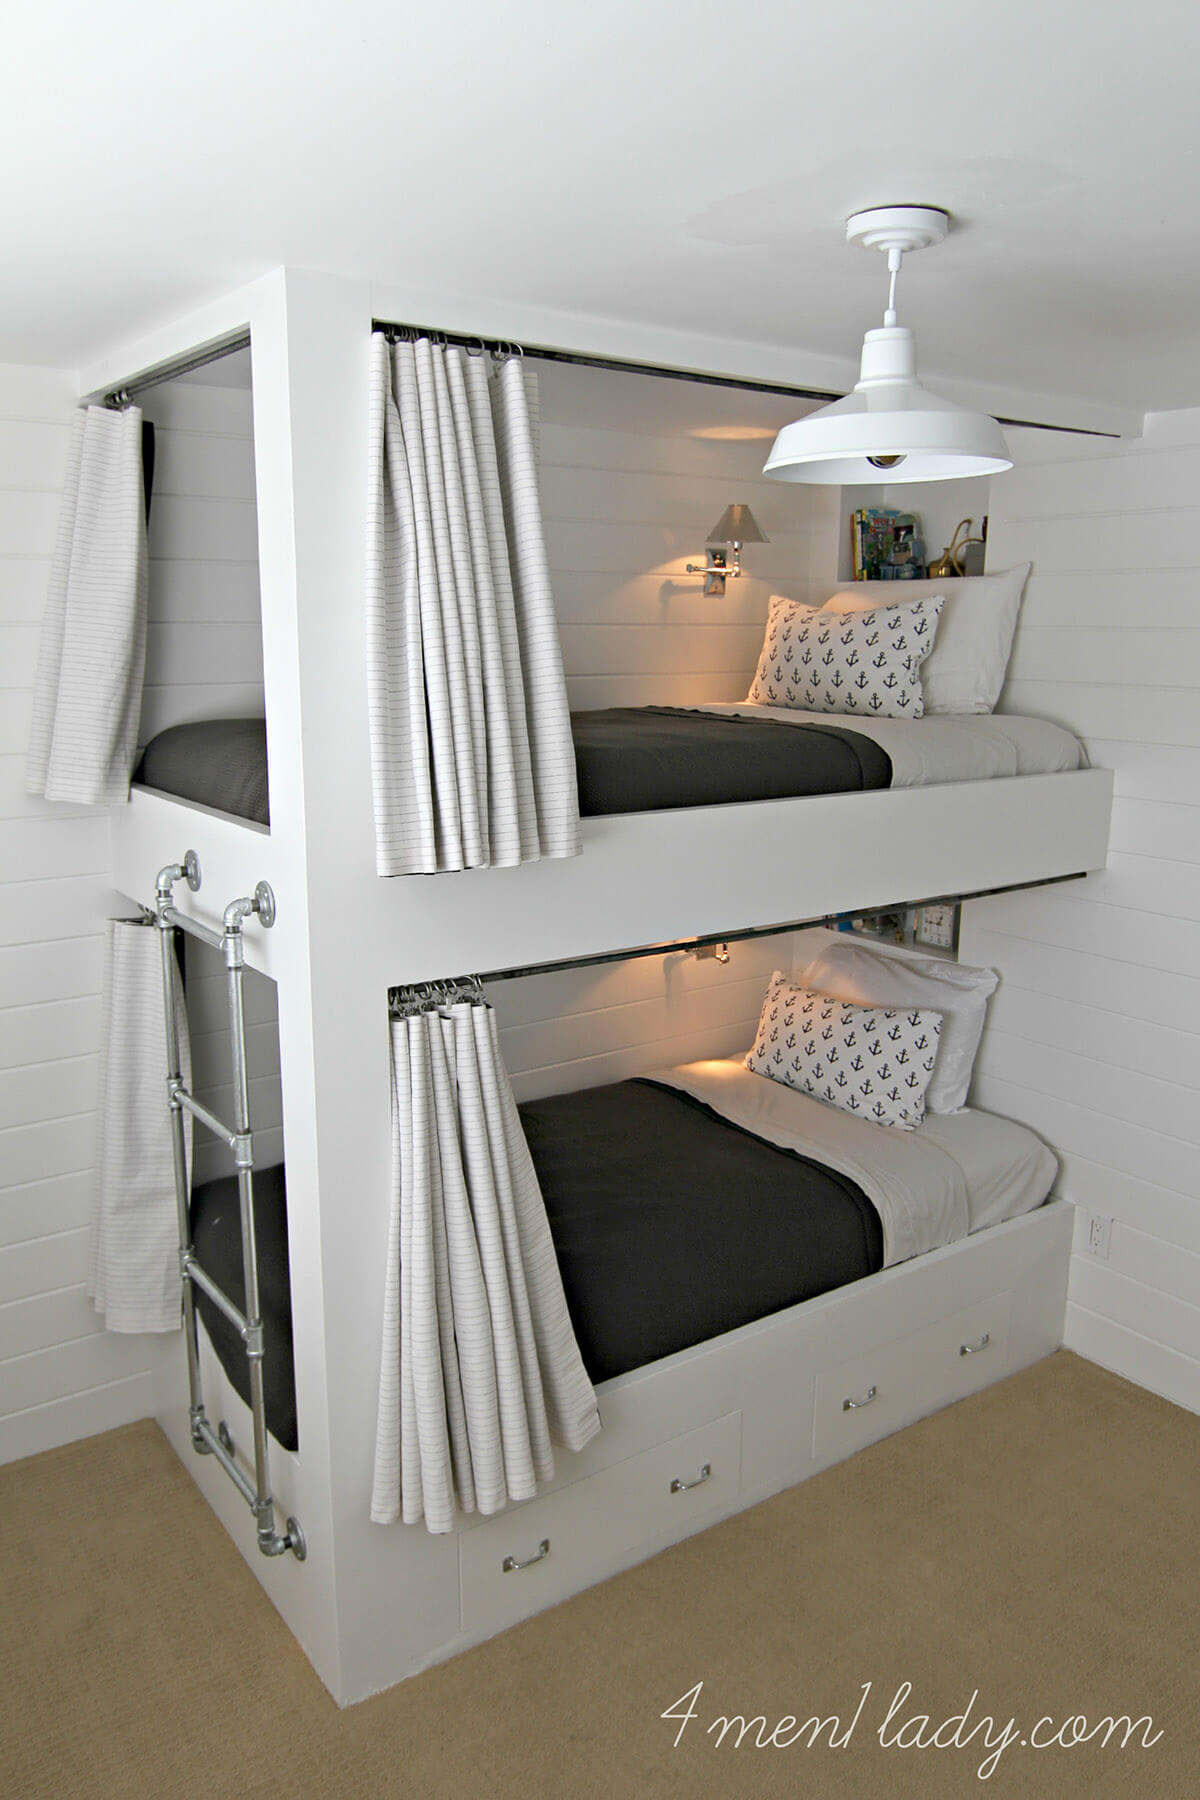 The Beauty of Built-In Bunk Beds